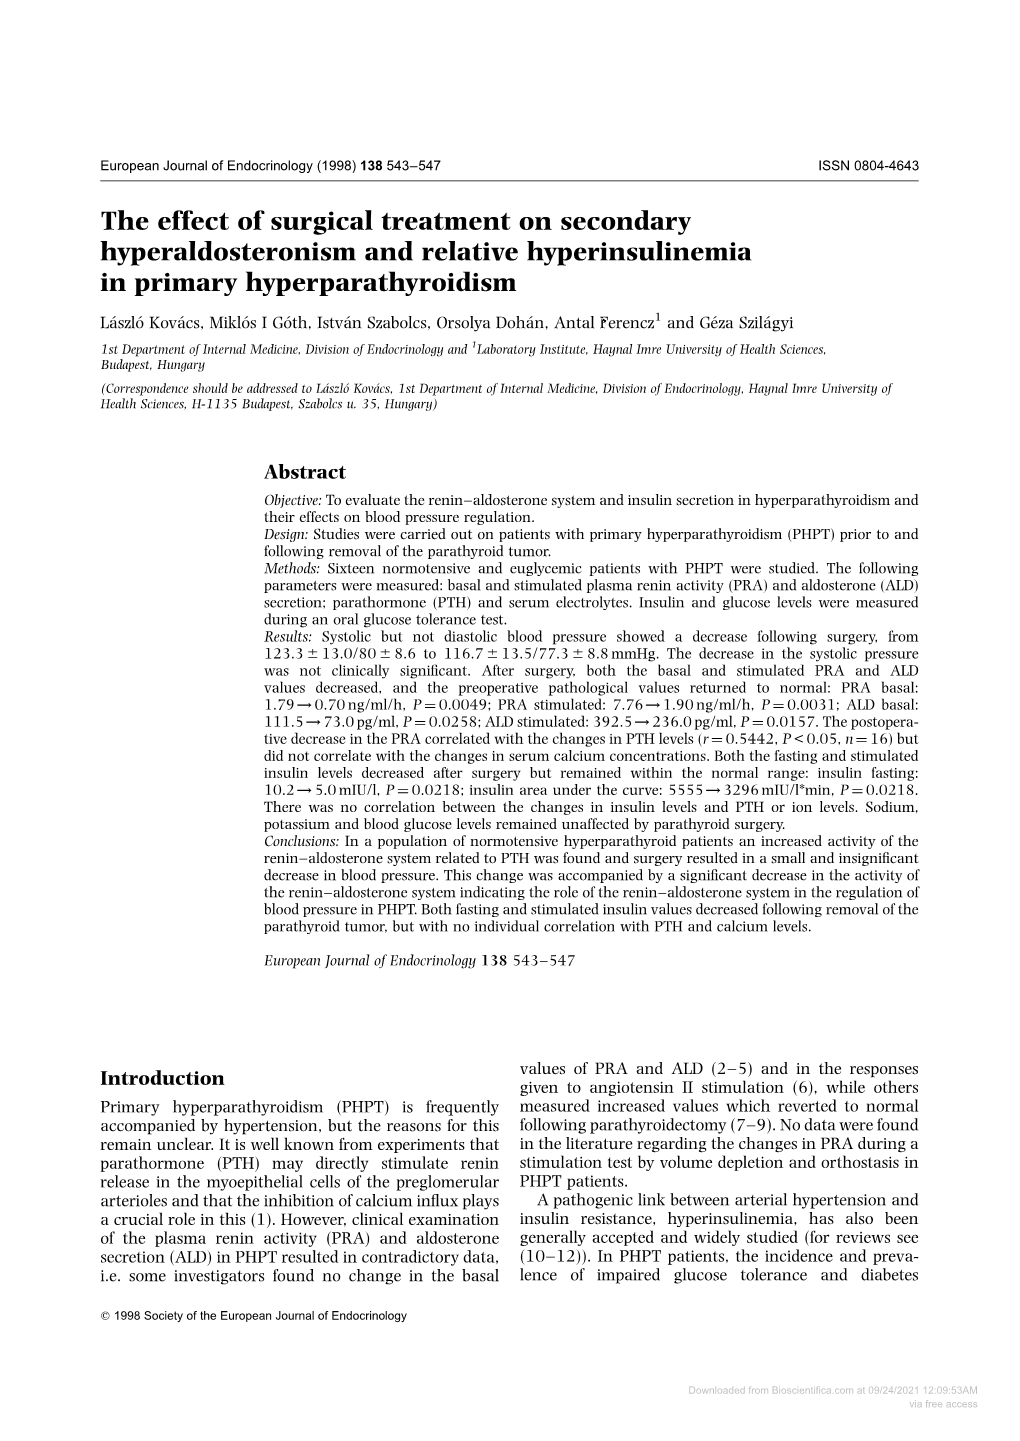 The Effect of Surgical Treatment on Secondary Hyperaldosteronism and Relative Hyperinsulinemia in Primary Hyperparathyroidism